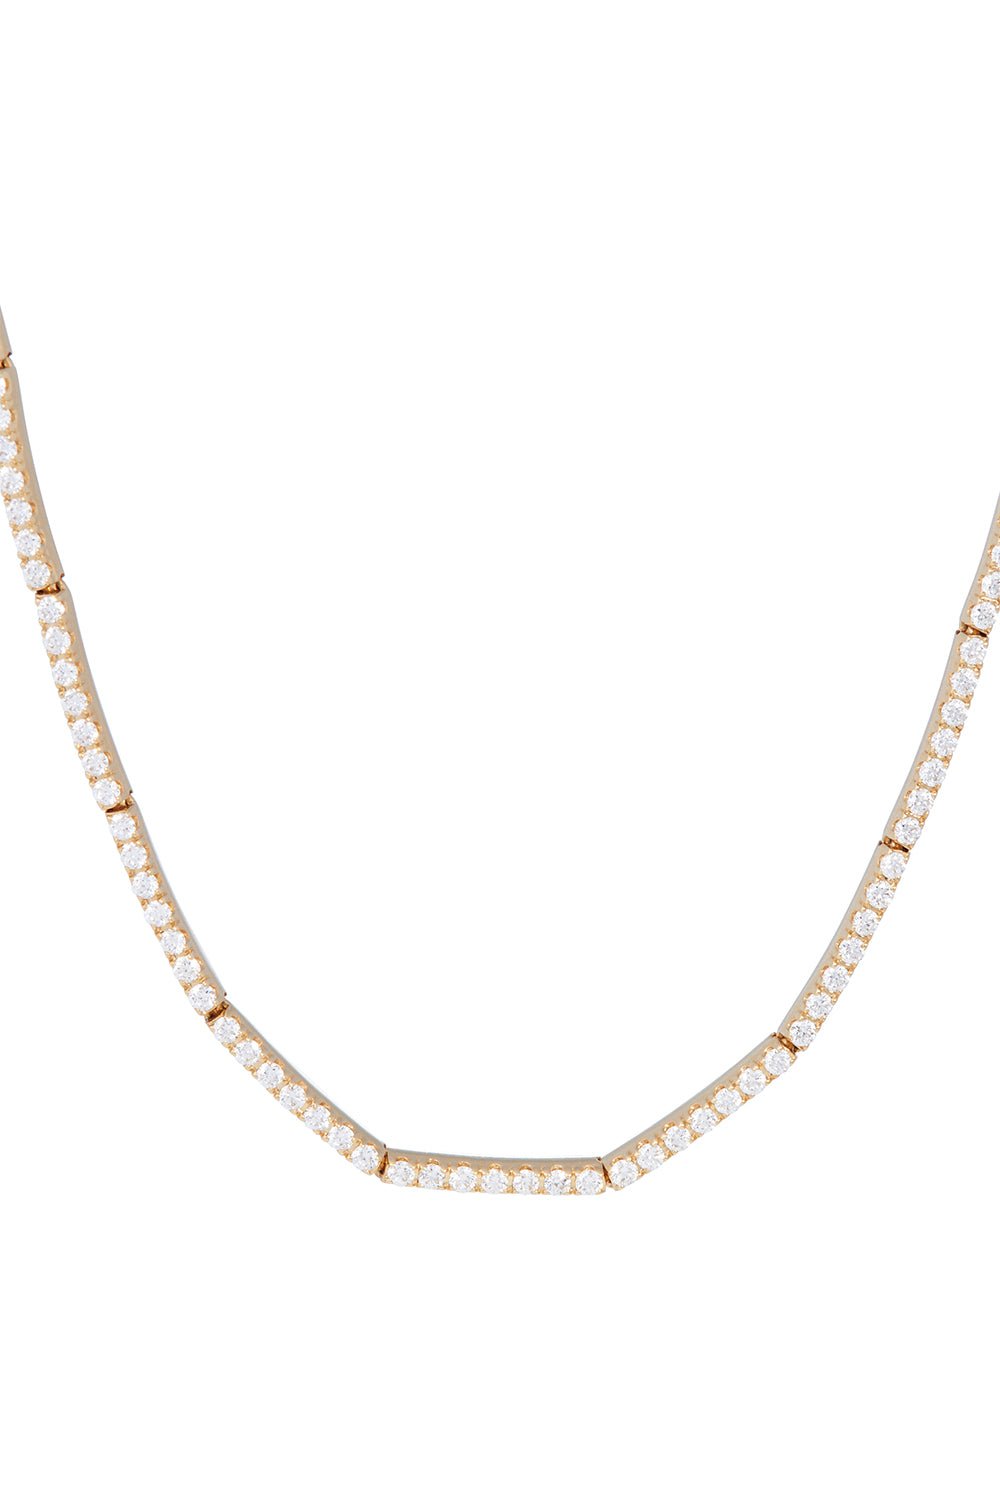 SIDNEY GARBER-Full Diamond Necklace - 15in - Yellow Gold-YELLOW GOLD